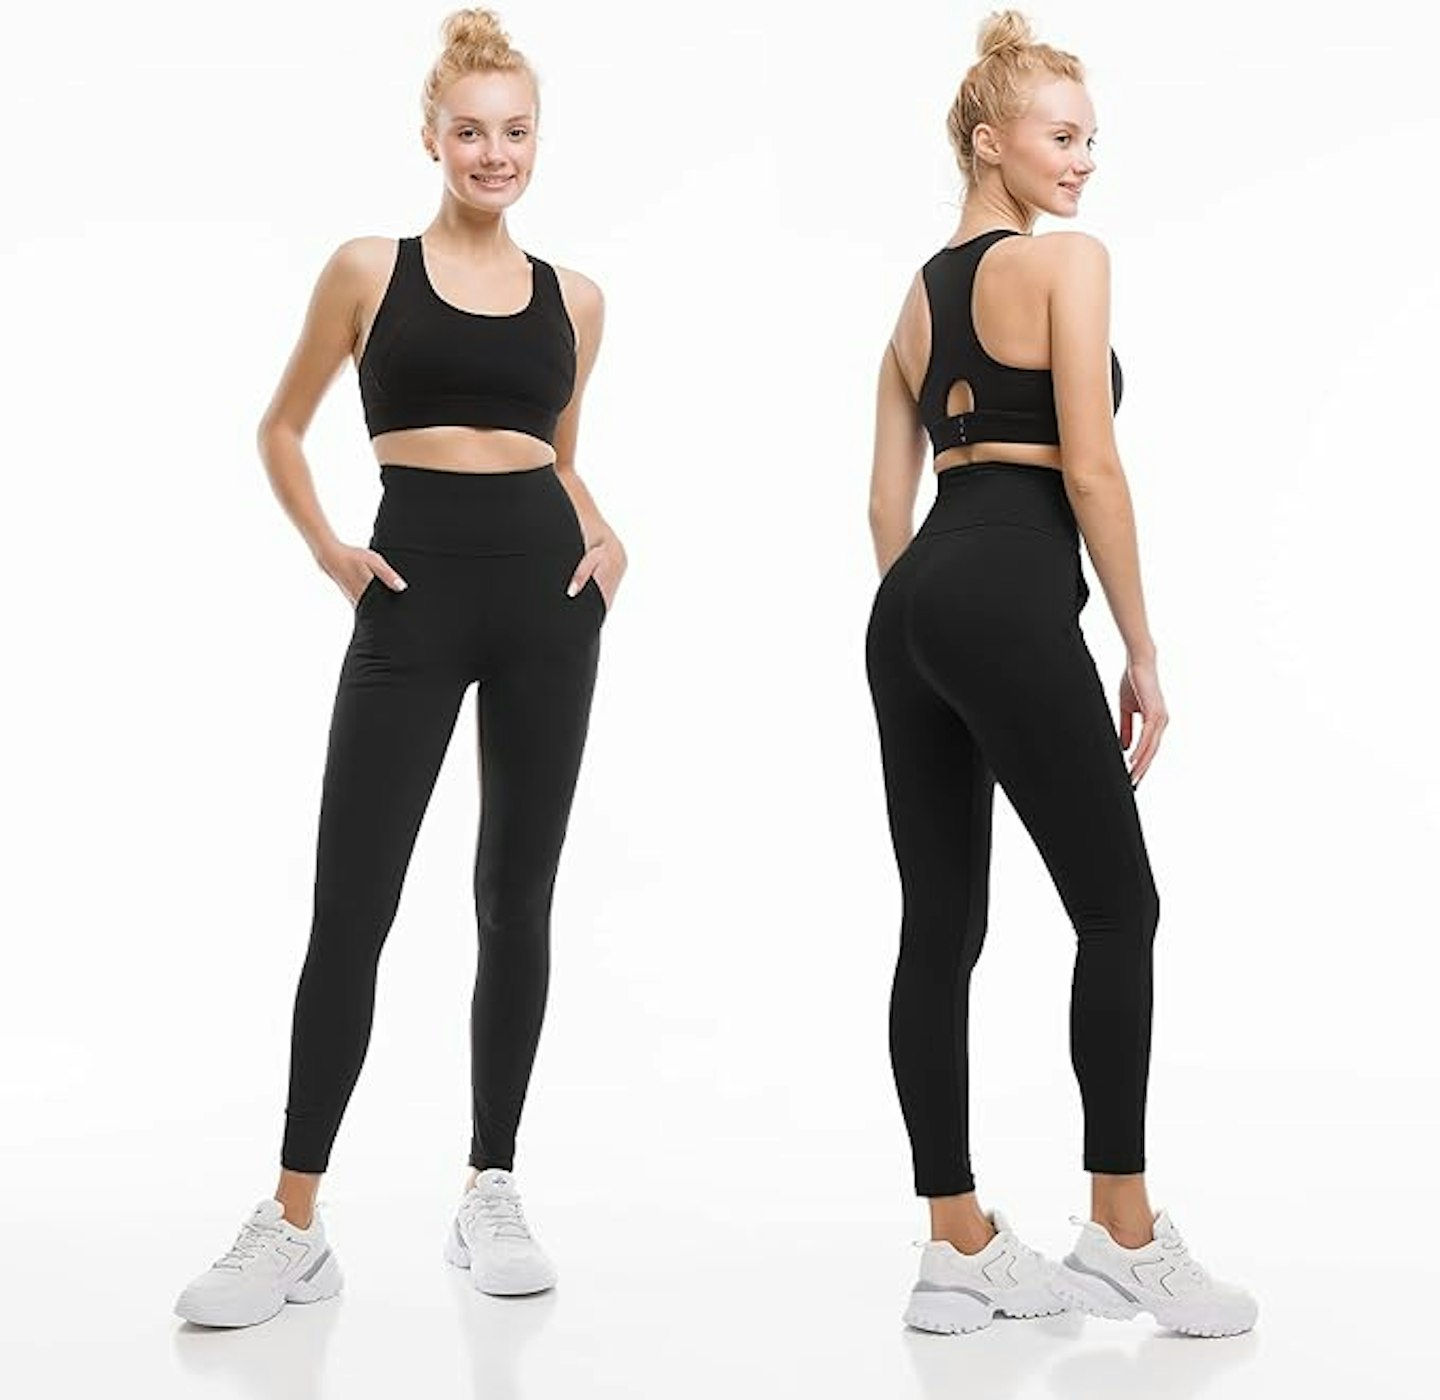 Top Rated - SINOPHANT High Waisted Leggings